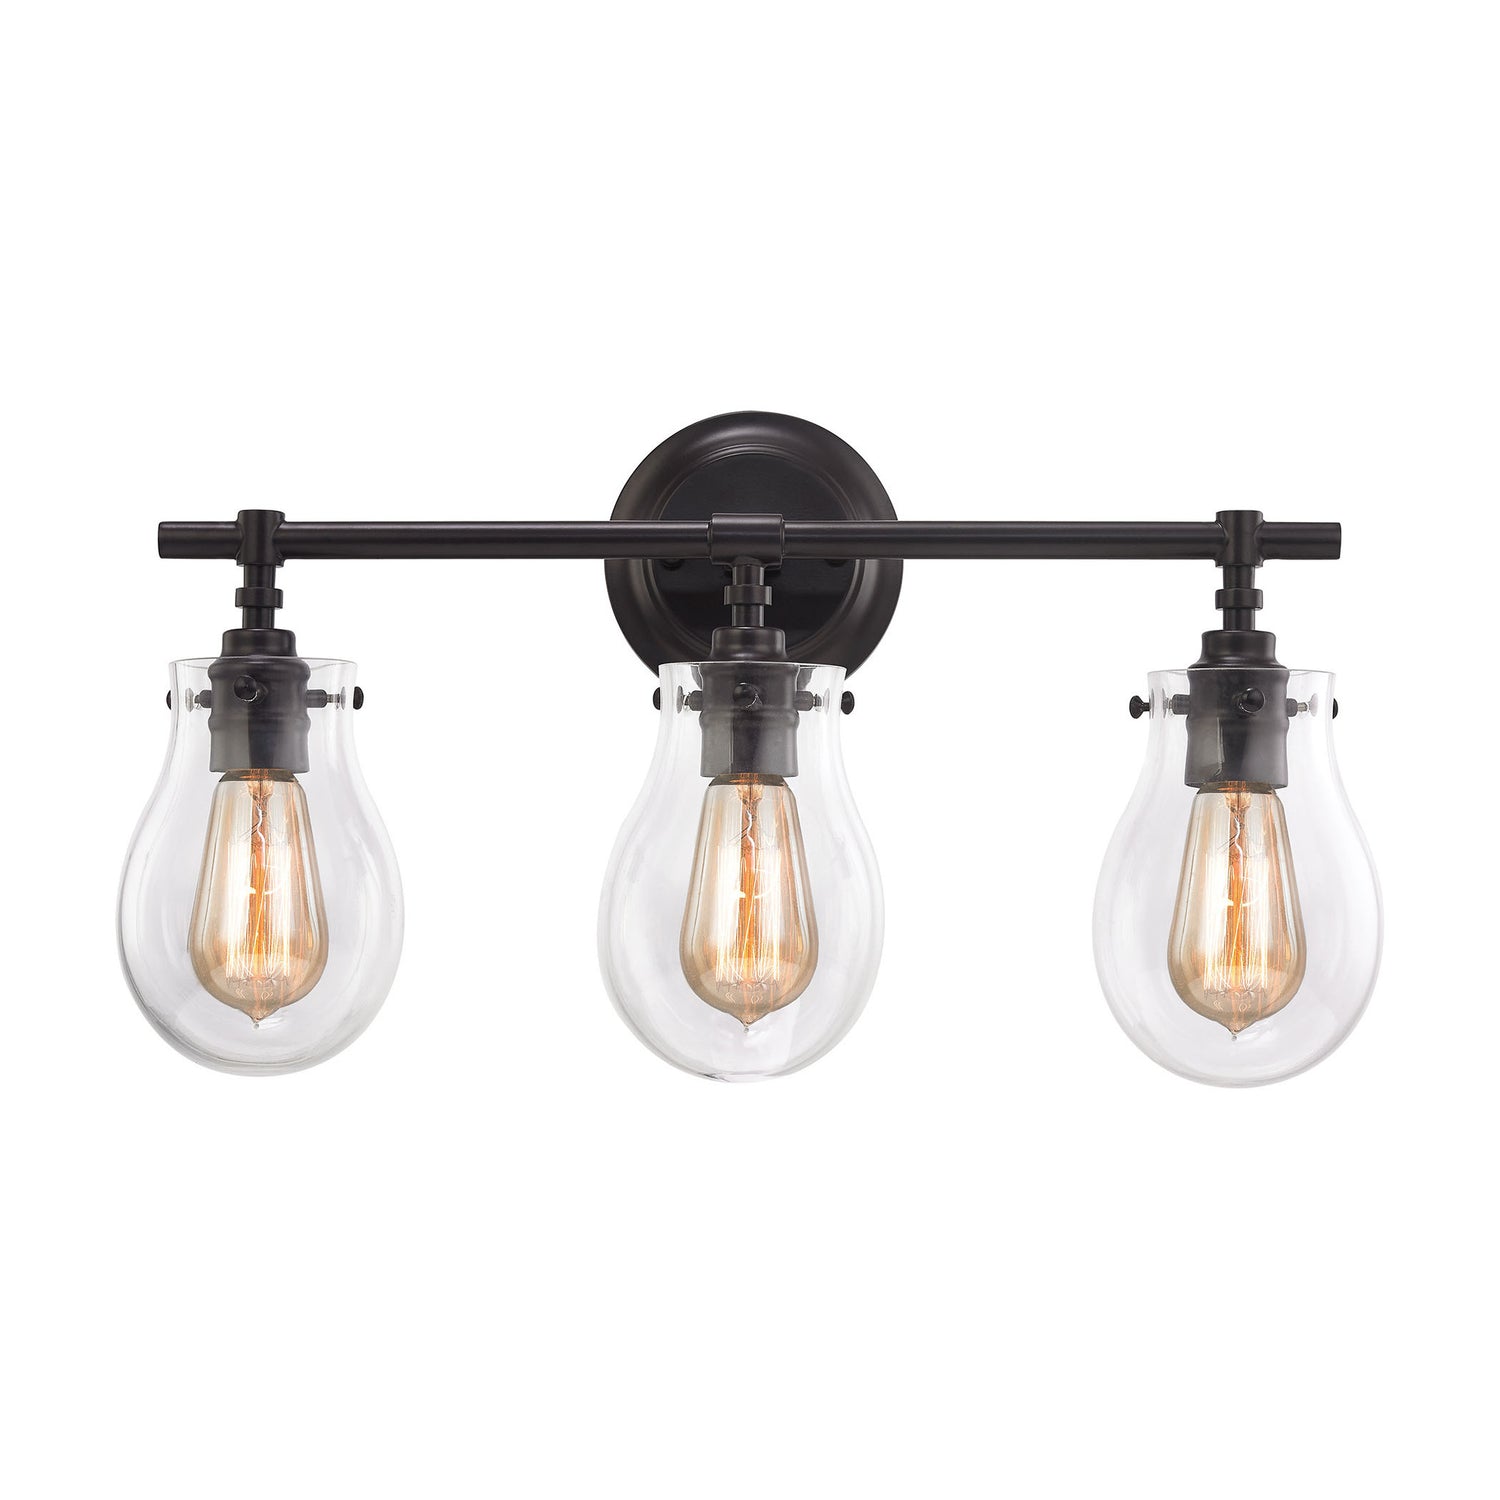 3 Light Jaelyn Vanity Light in Oil Rubbed Bronze with clear teardrop glass shades by Elk Lighting 31930/3